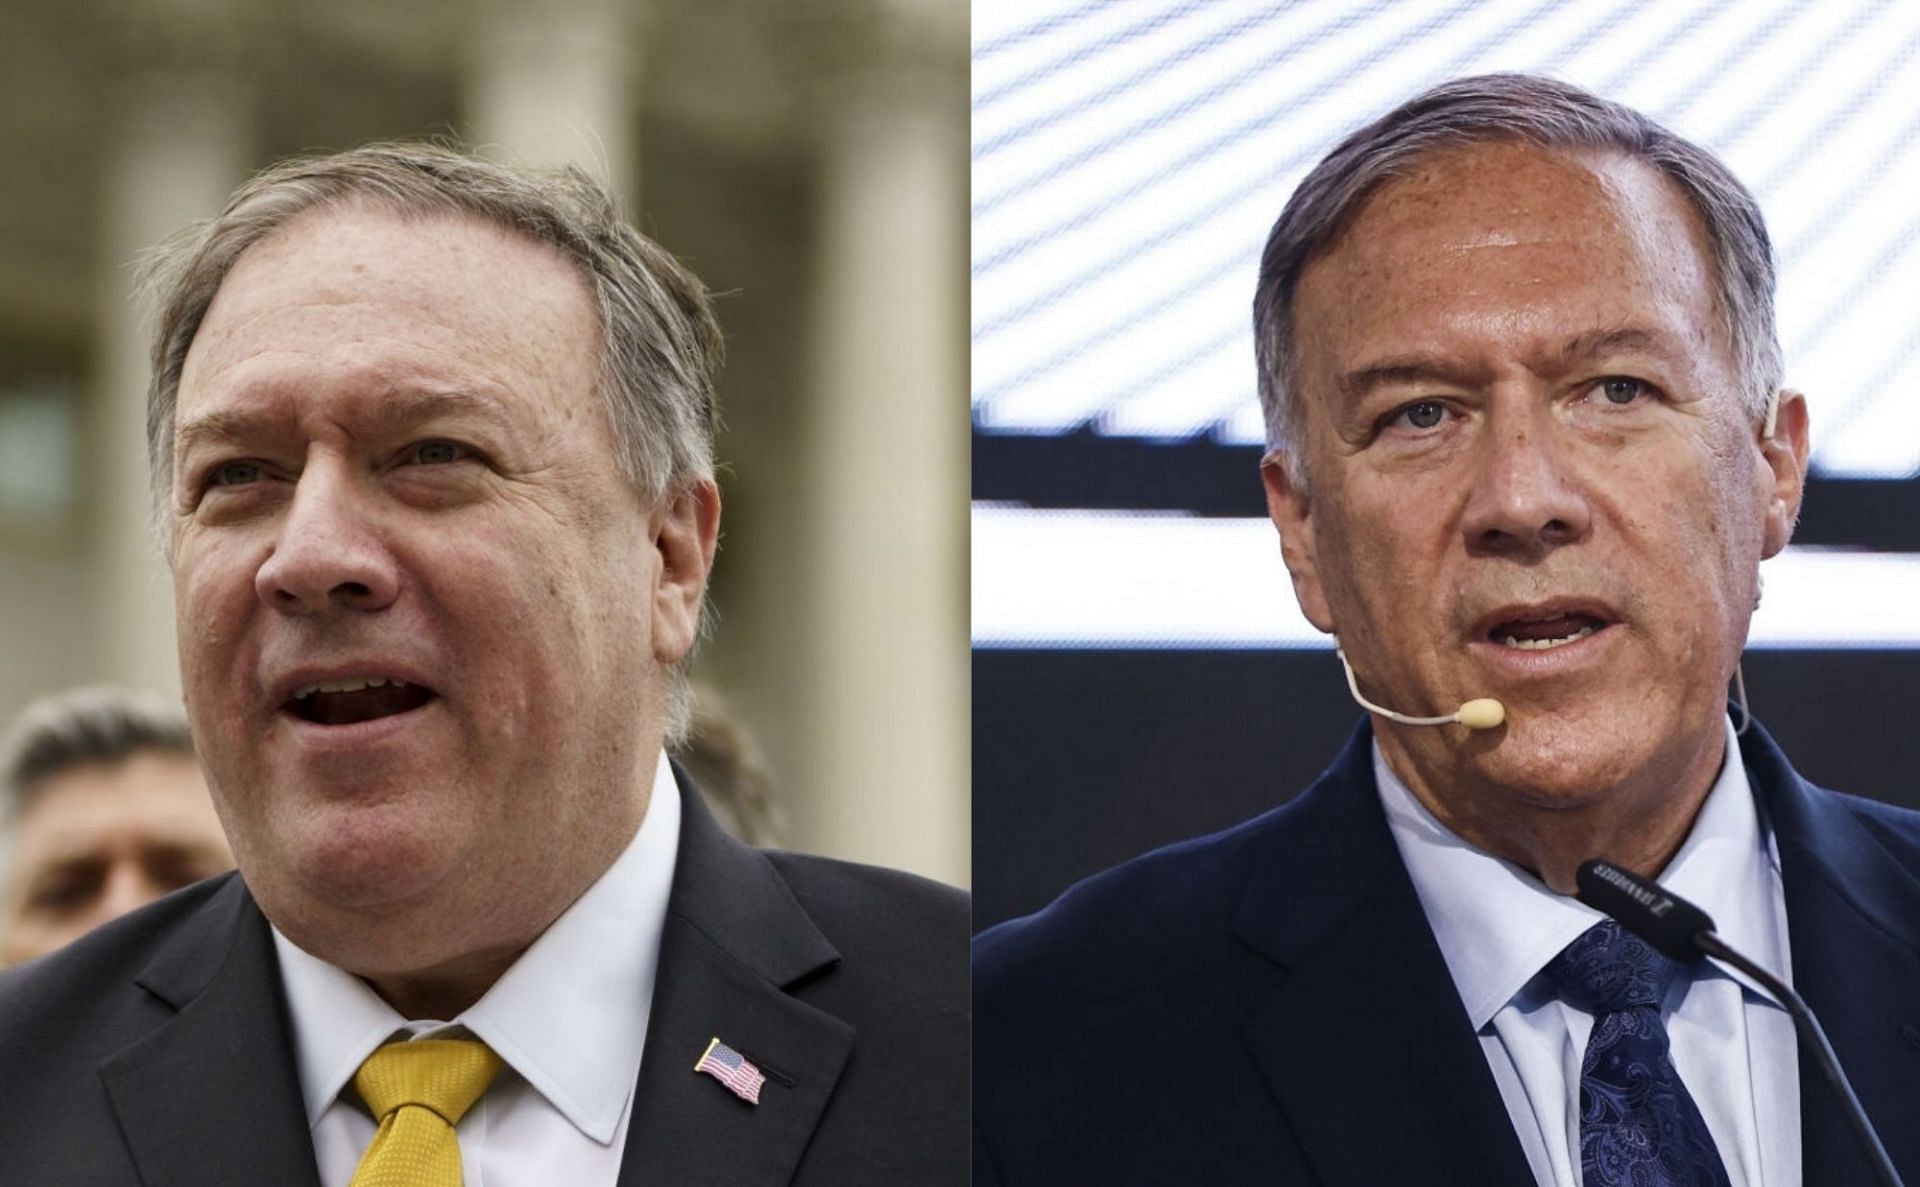 Mike Pompeo has lost 90 pounds in six months (Image via Ting Shen/Getty Images and Kobi Wolf/Getty Images)